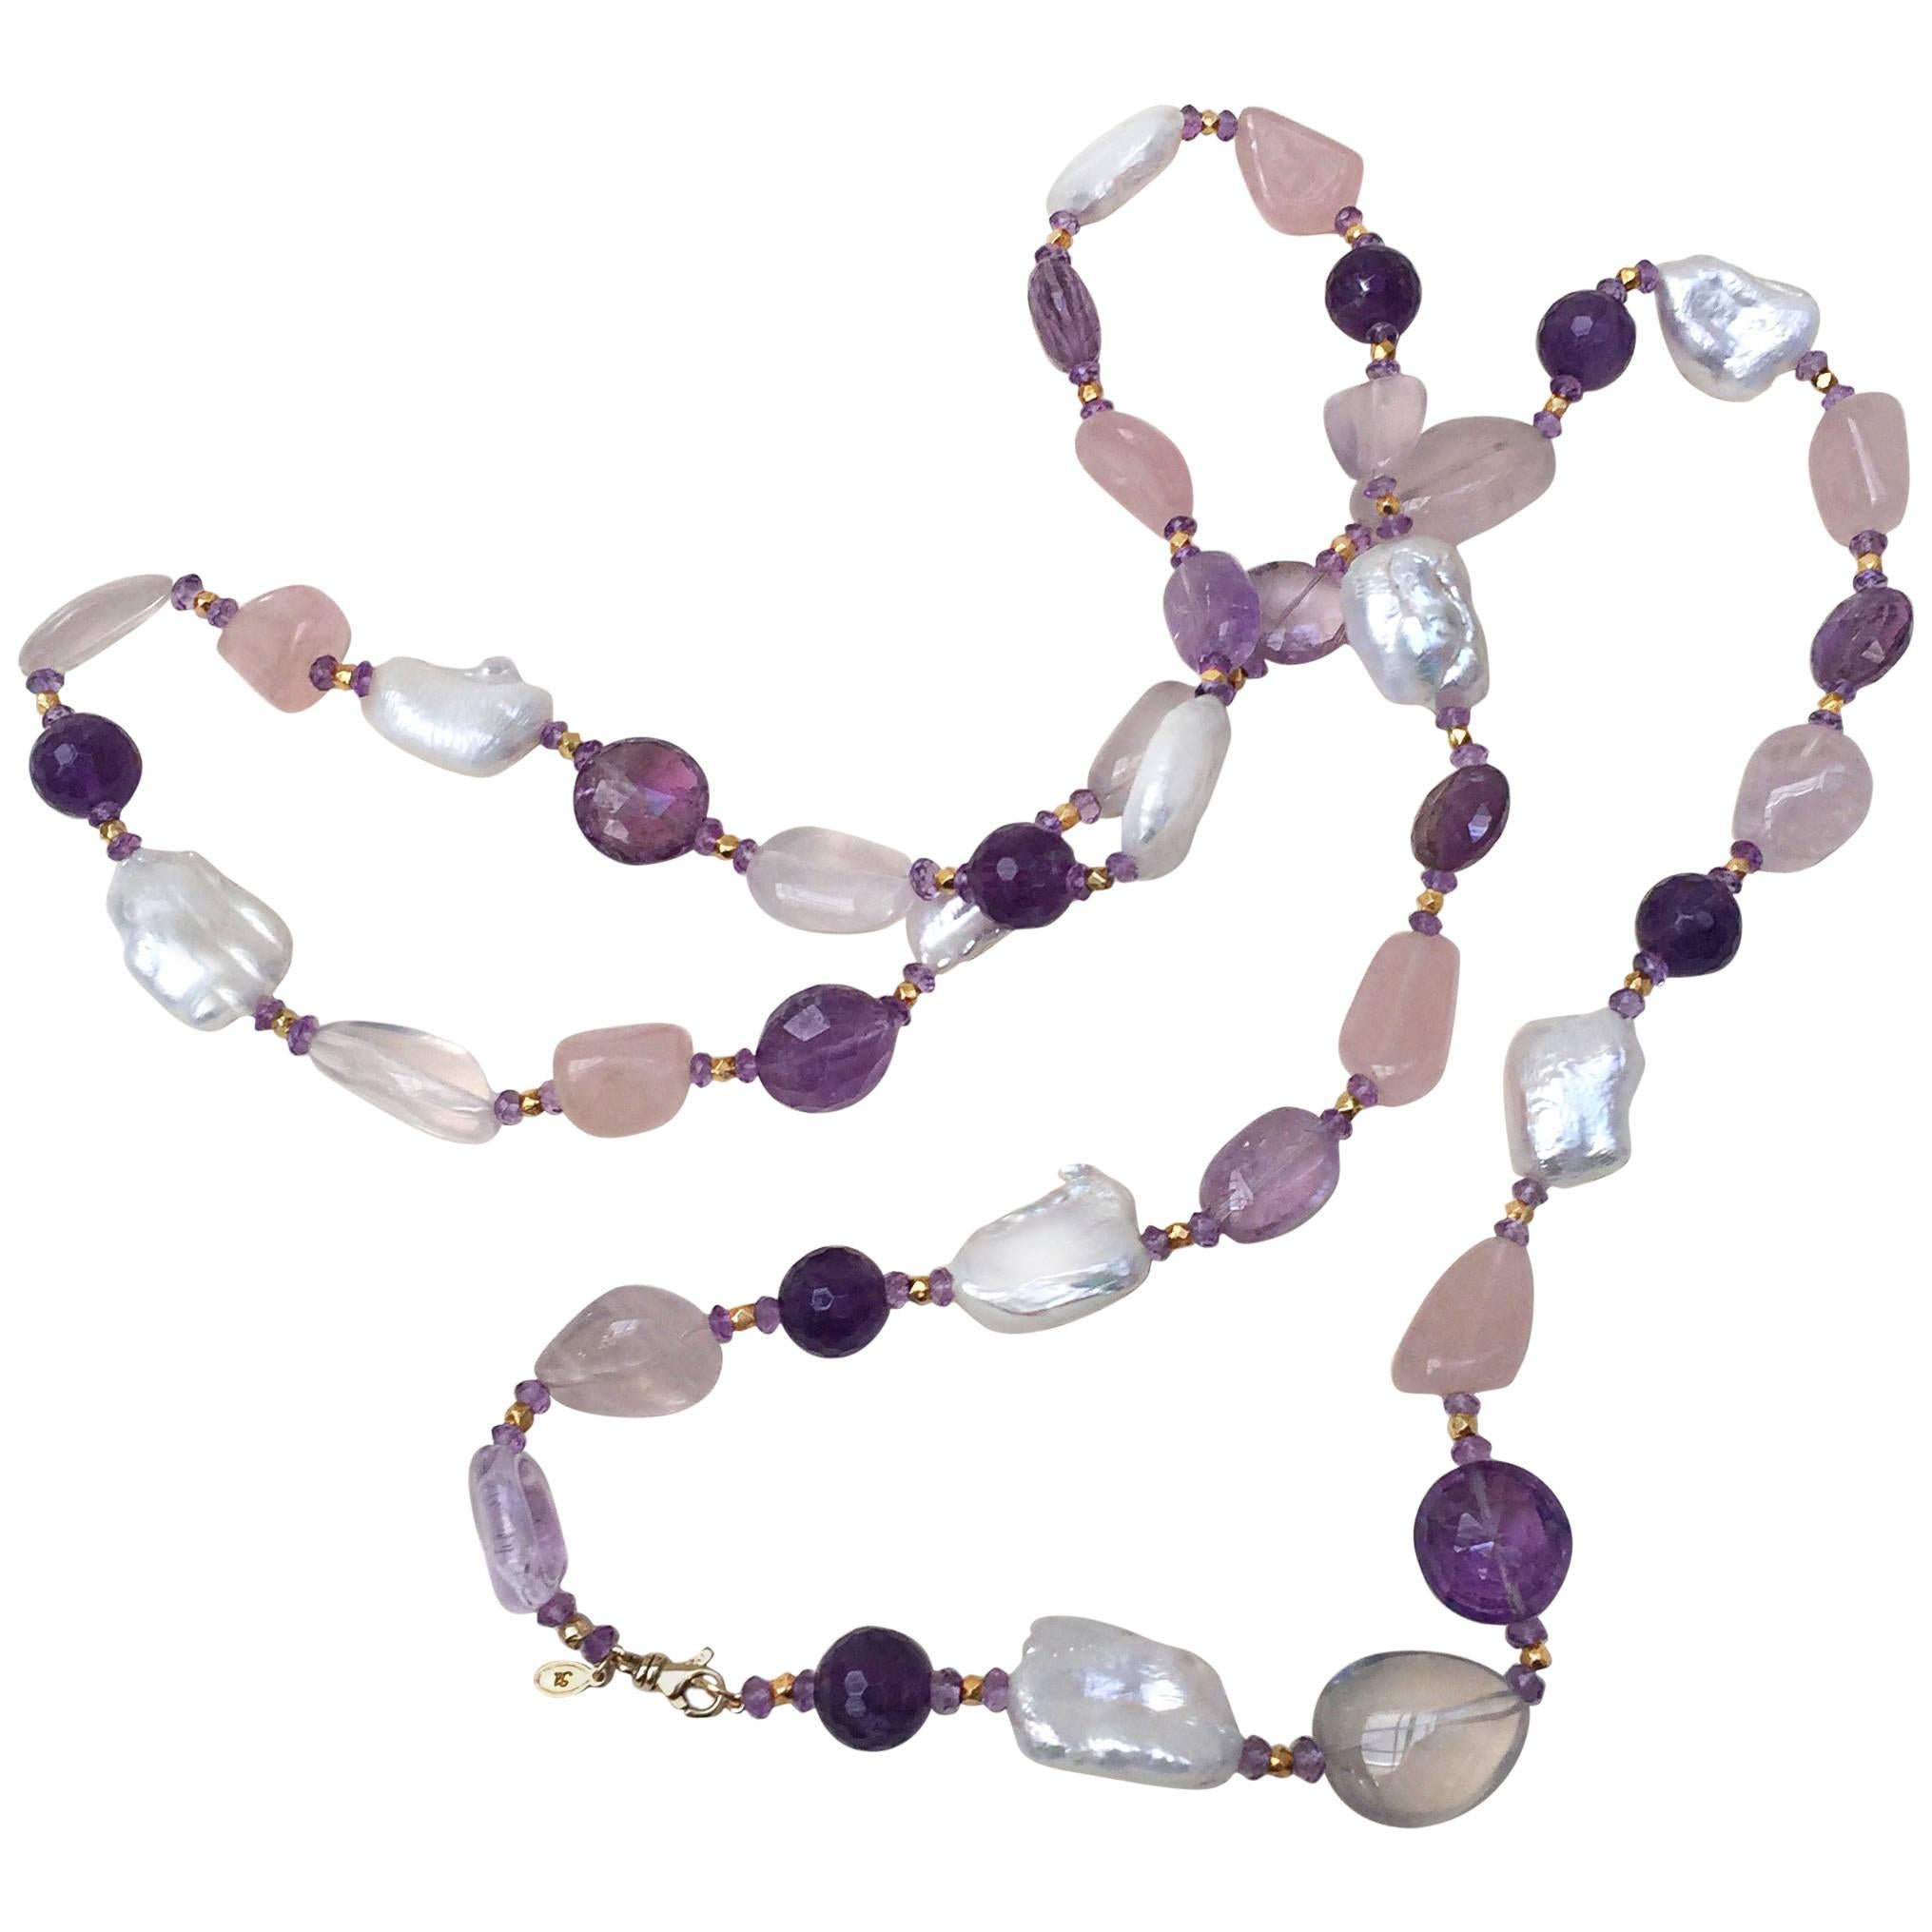 The rose quartz, amethyst, pearl, and vermeil gold beads give this necklace with tassel great contrasting light and dark tones. The contrasting tone is highlighted by the different shapes and textures of the beads. A 14k yellow gold clasp secures